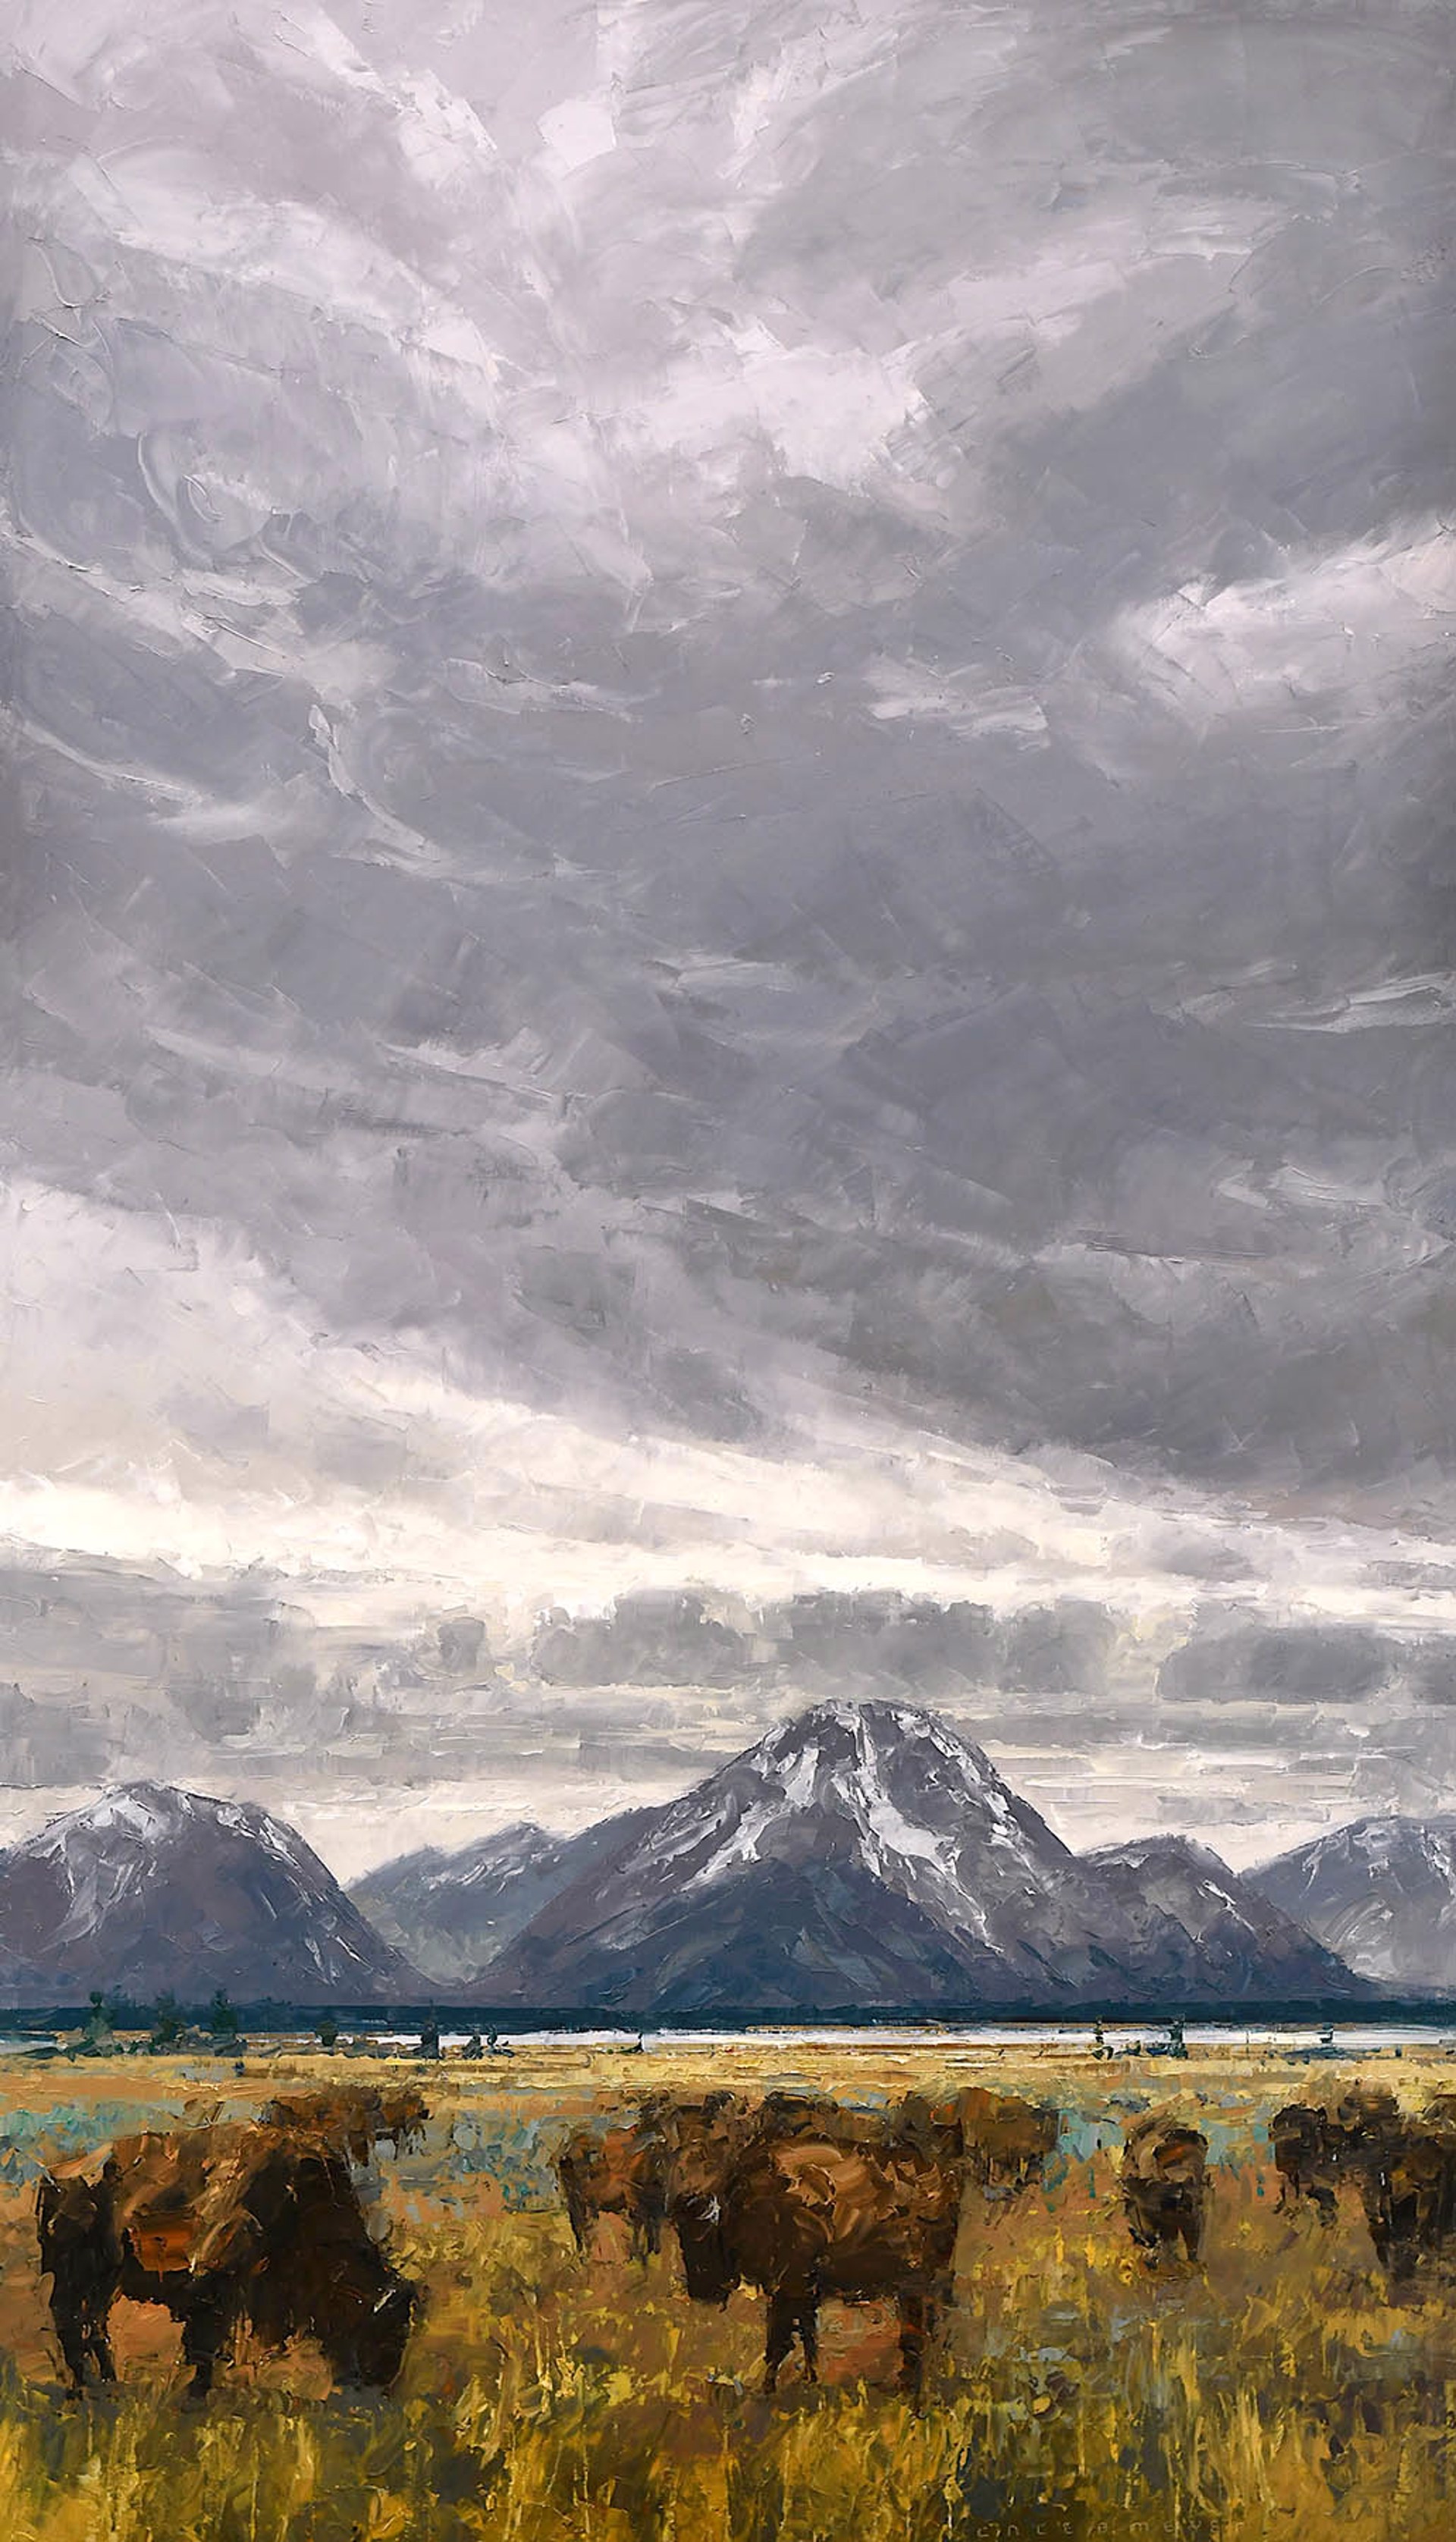 Original Oil Painting By Caleb Meyer Featuring Mount Moran With Big Storm Clouds And Bison Herd In Foreground